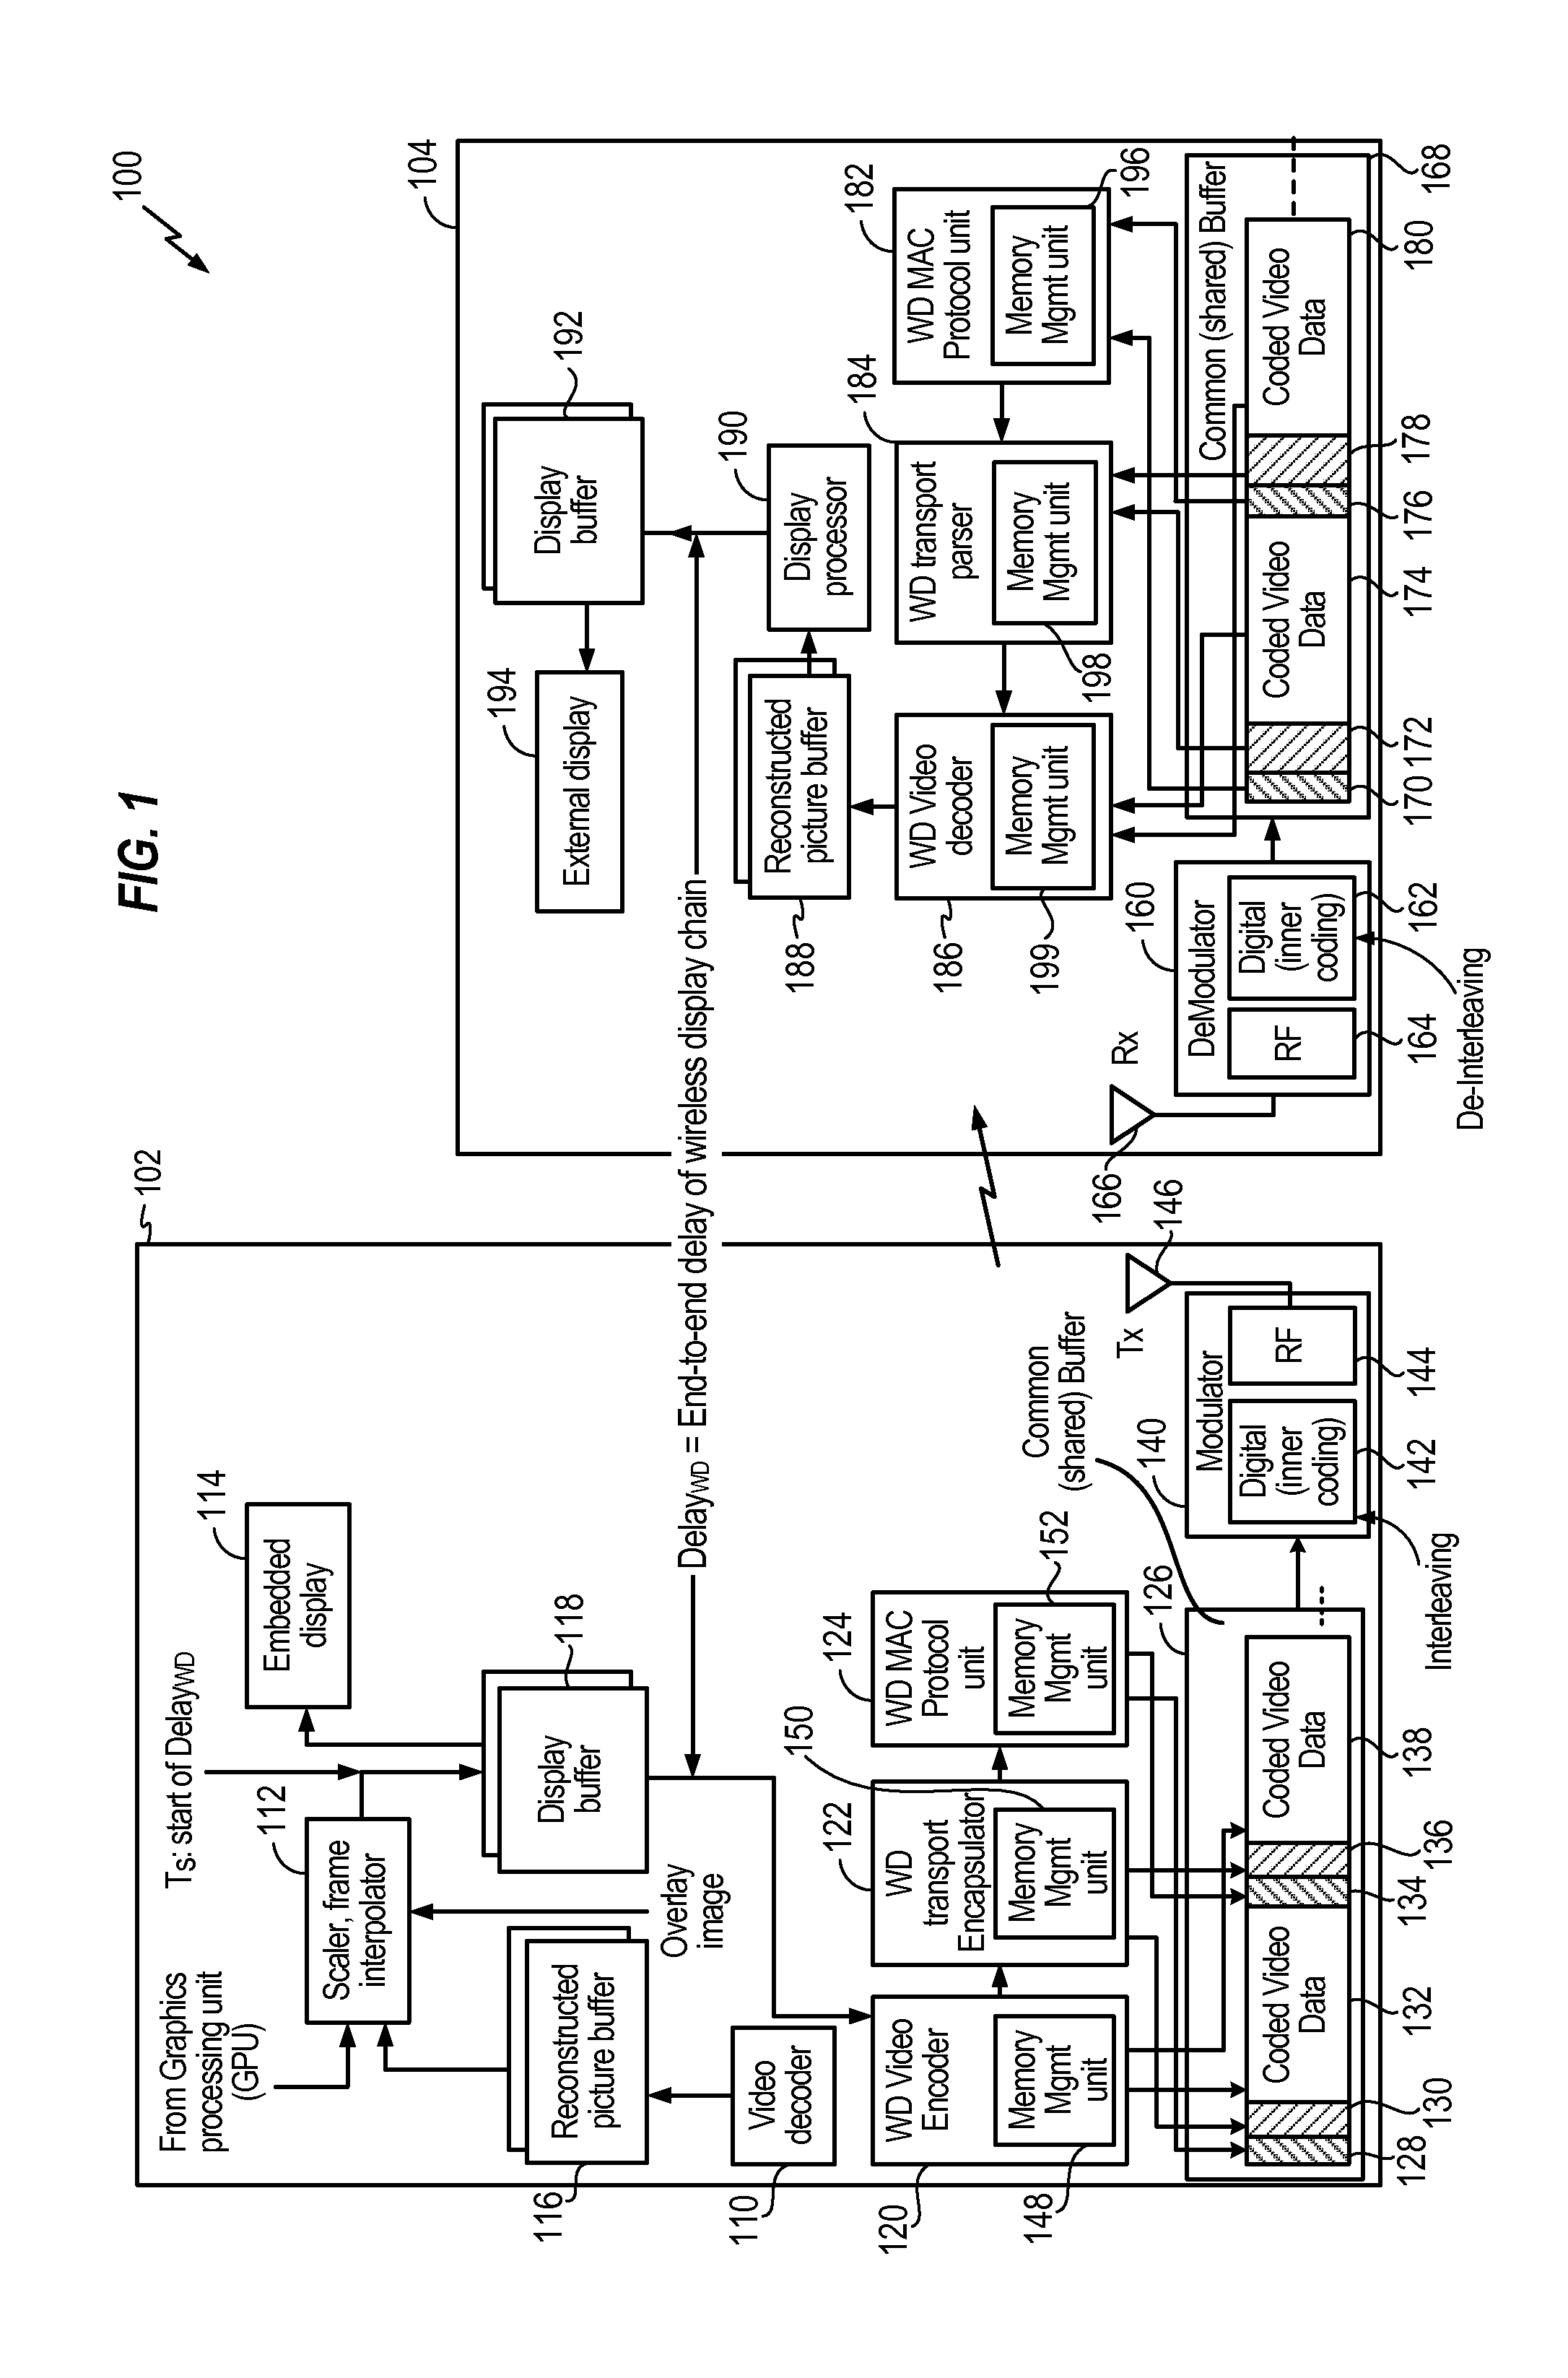 System and method of transmitting content from a mobile device to a wireless display